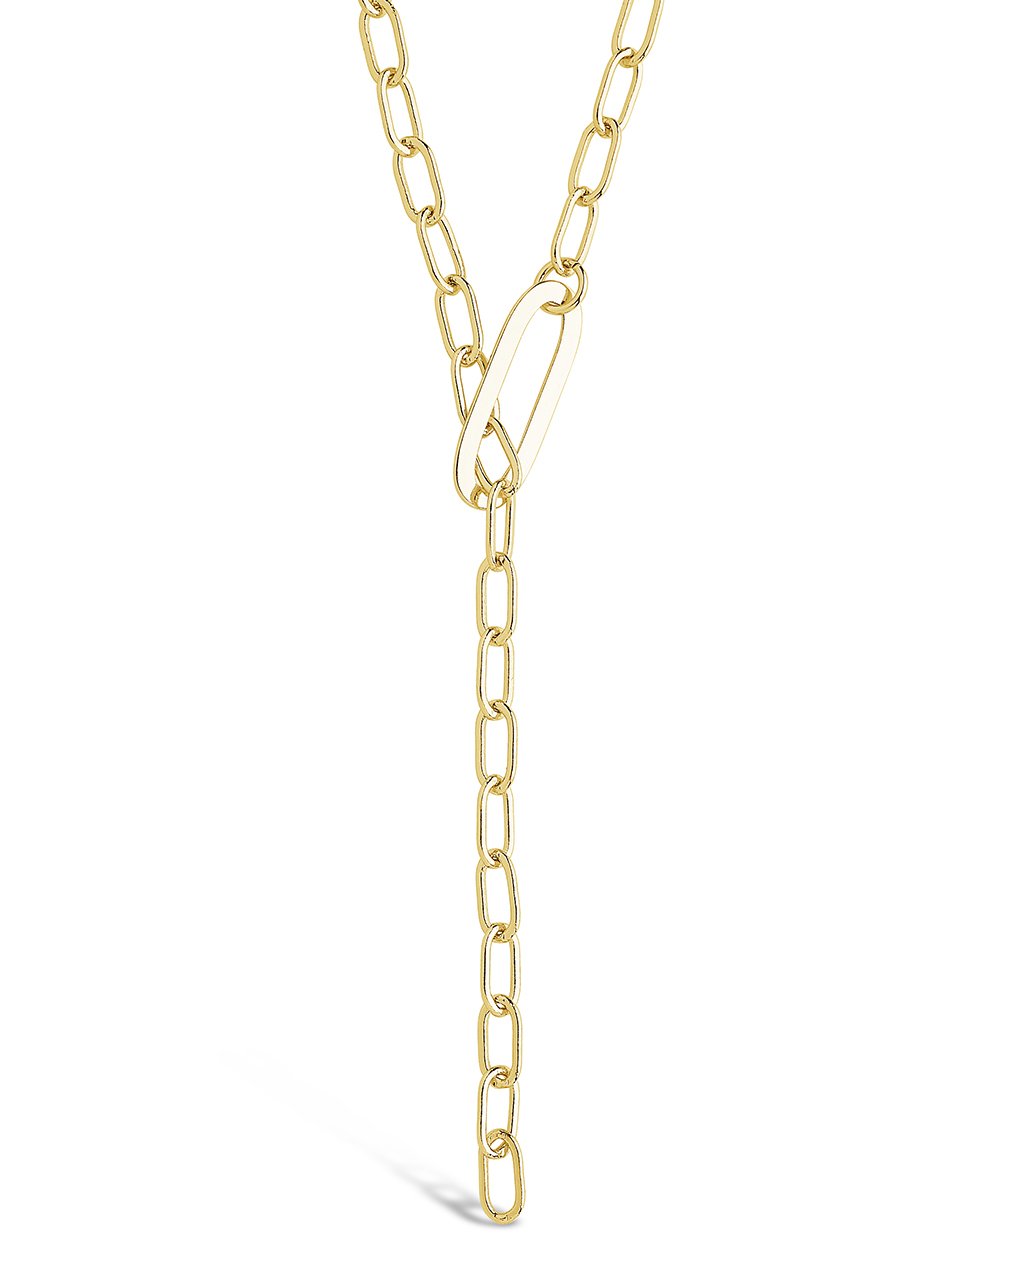 Chain Link Lariat Necklace - Sterling Forever